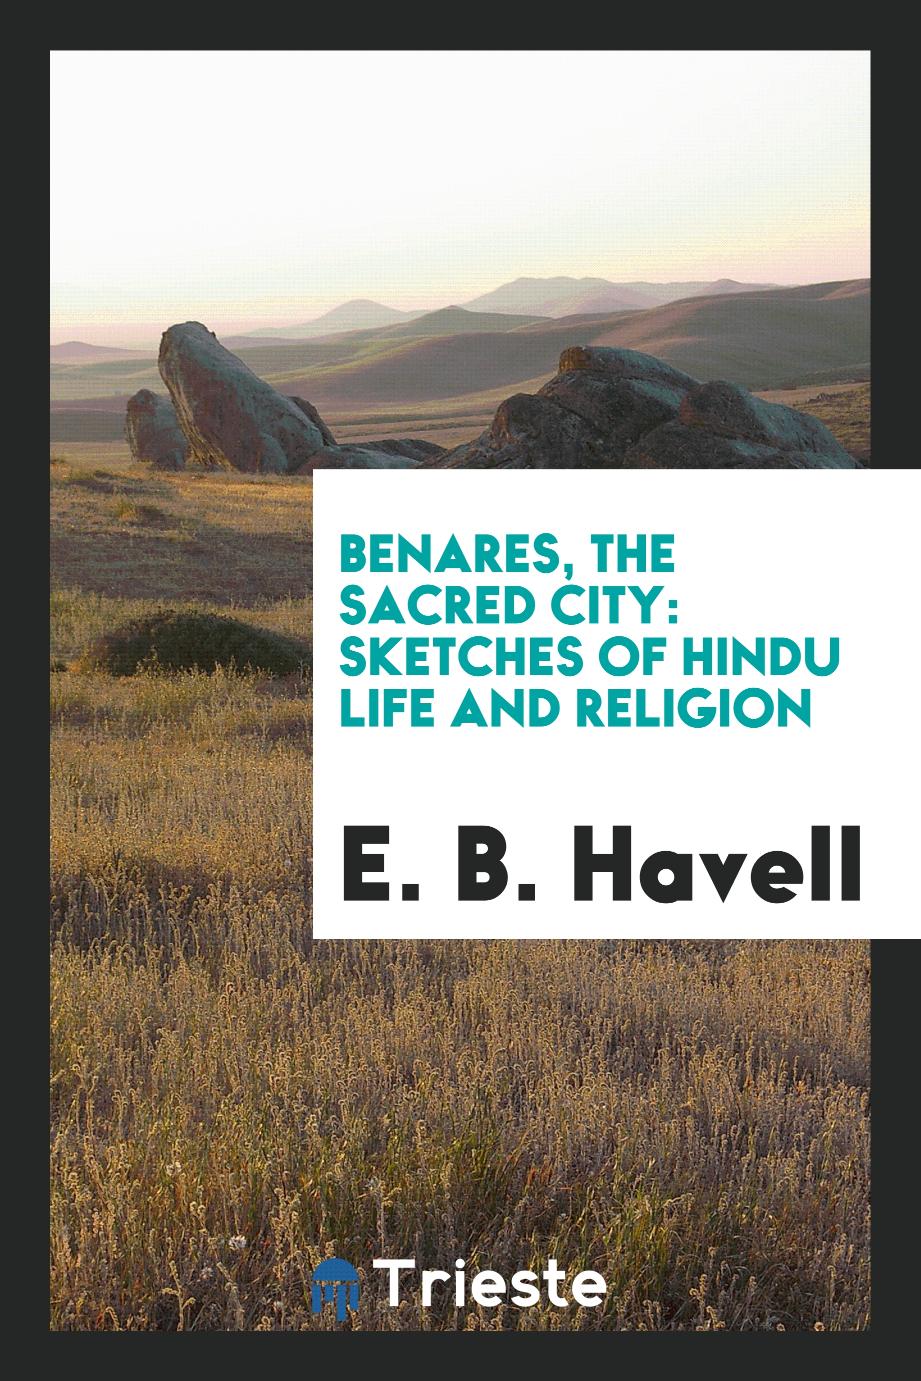 Benares, the sacred city: sketches of Hindu life and religion